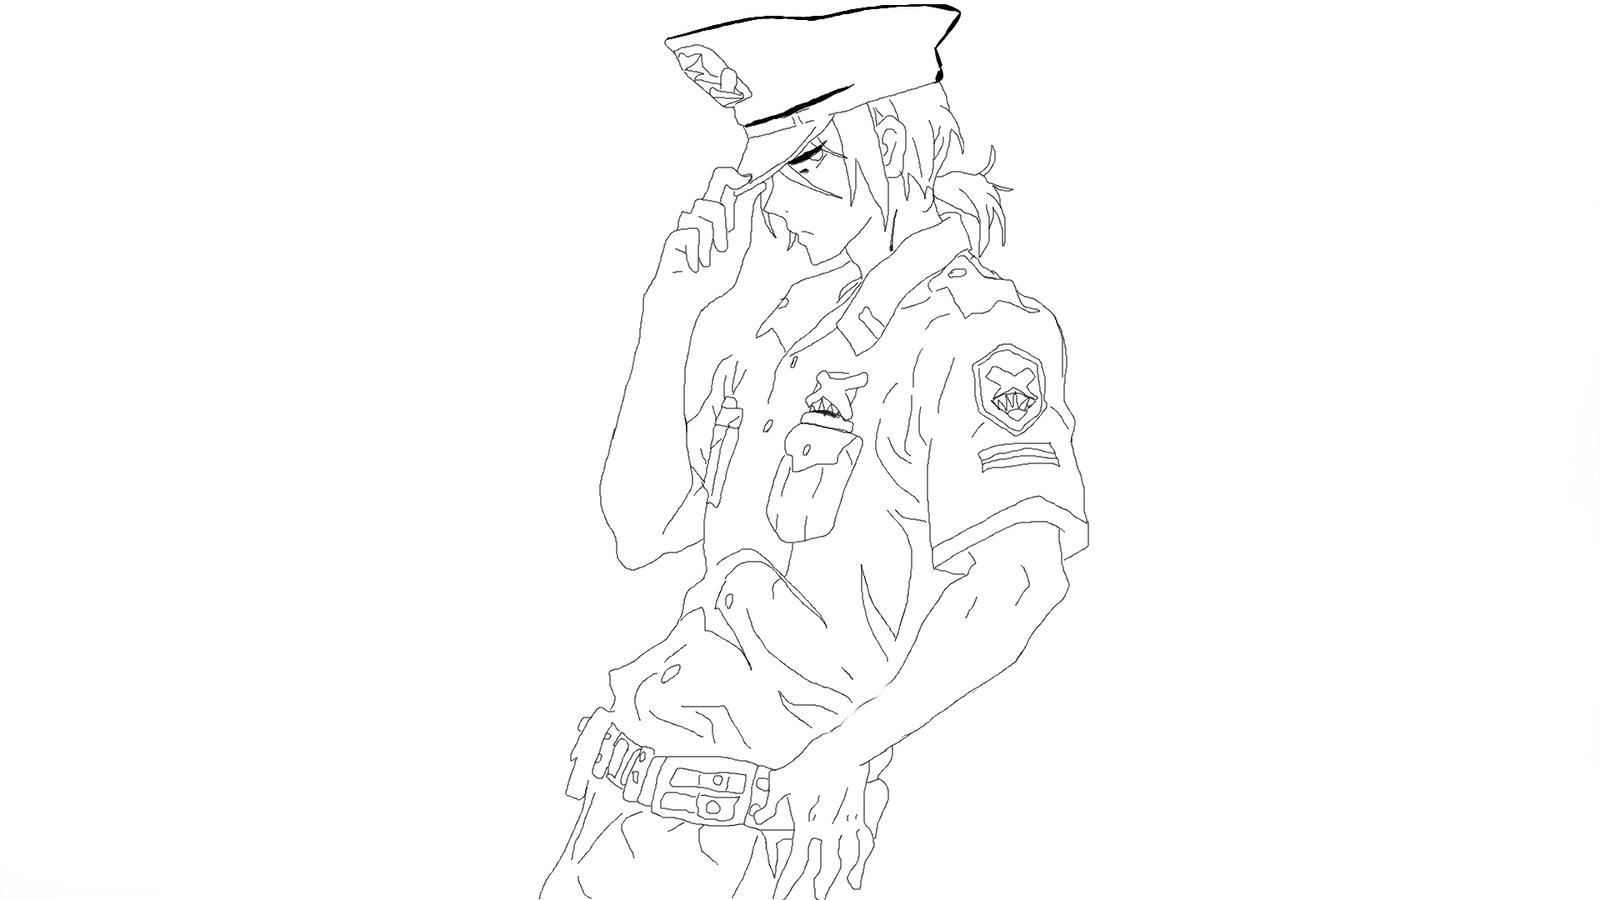 Matsuoka Rin Coloring Page by ColorDAnimez on DeviantArt